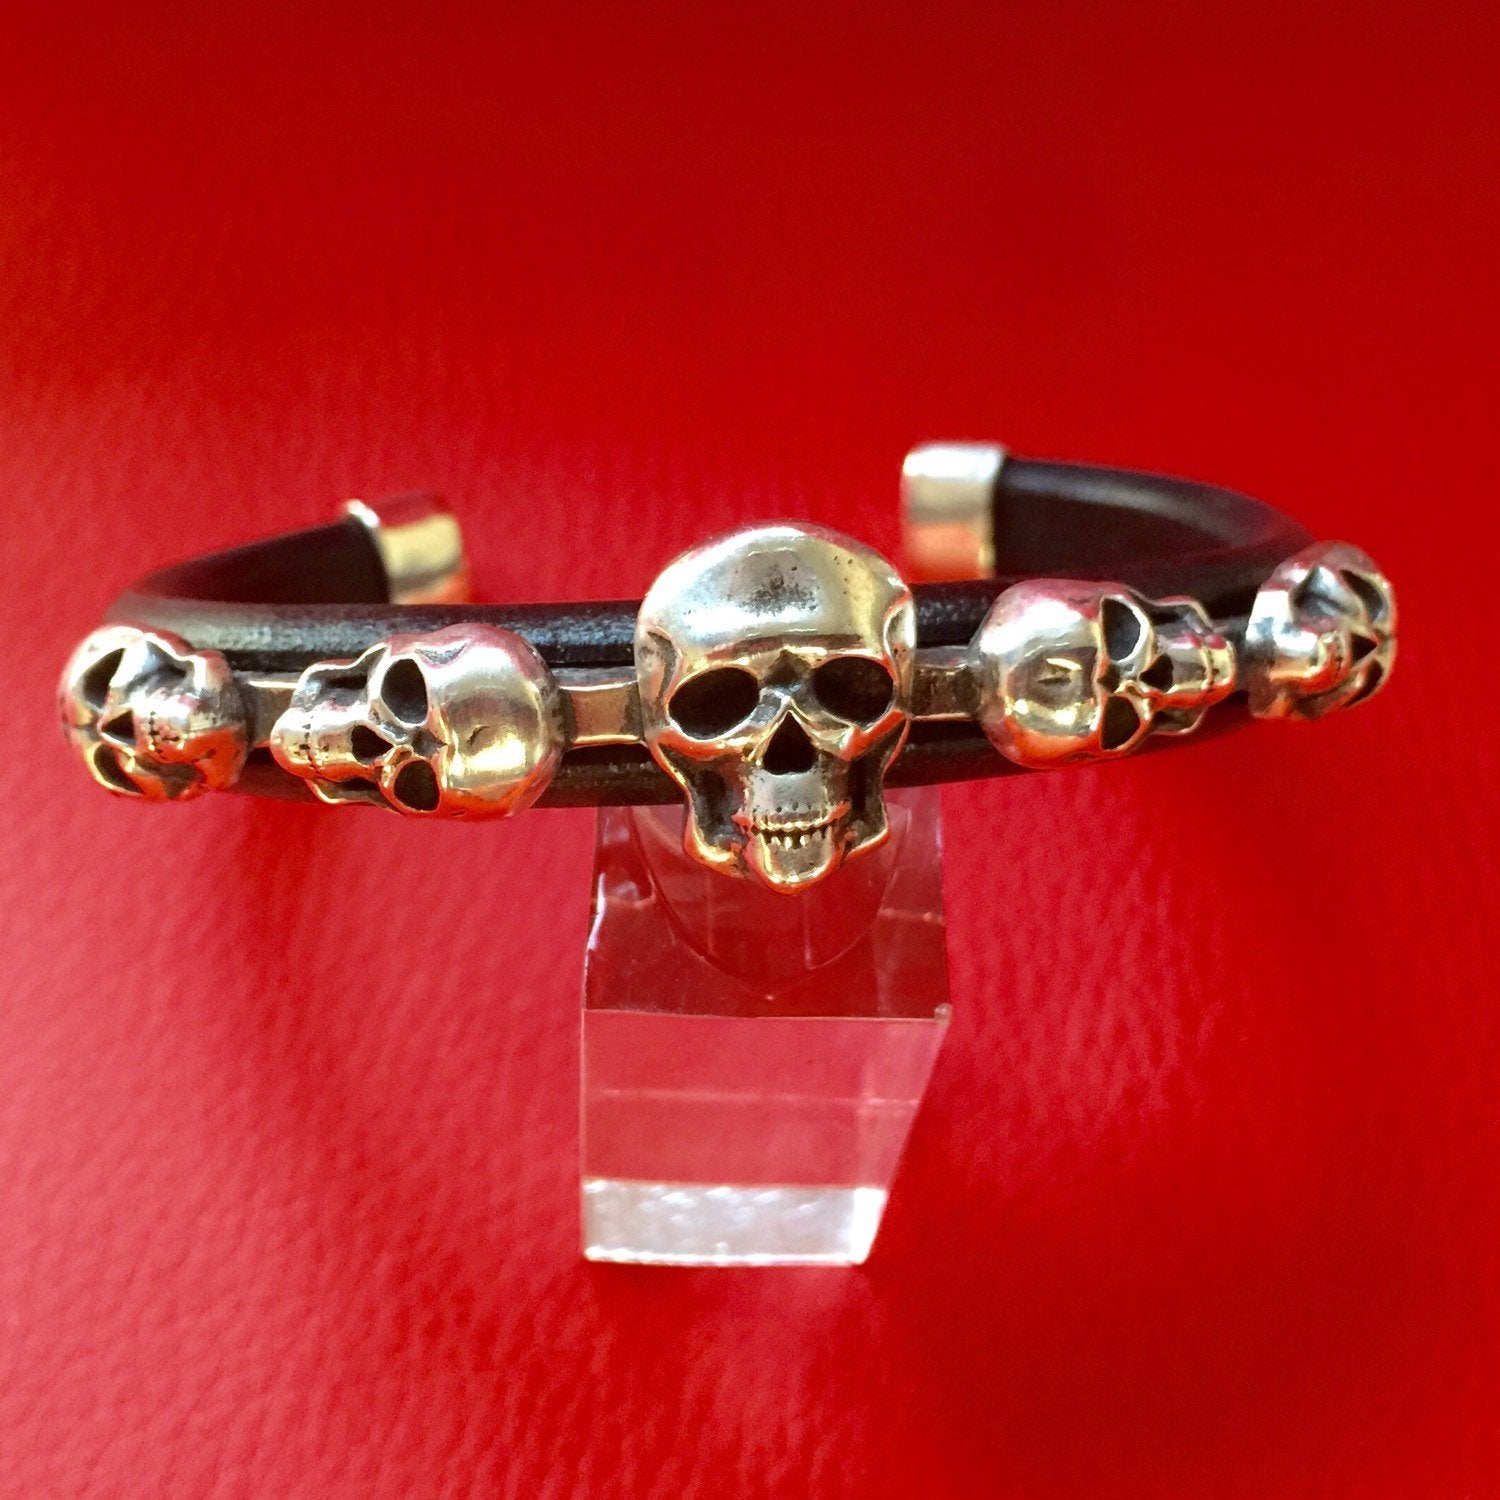 C26 Skull Sterling Silver Inlayed on Leather Cuff